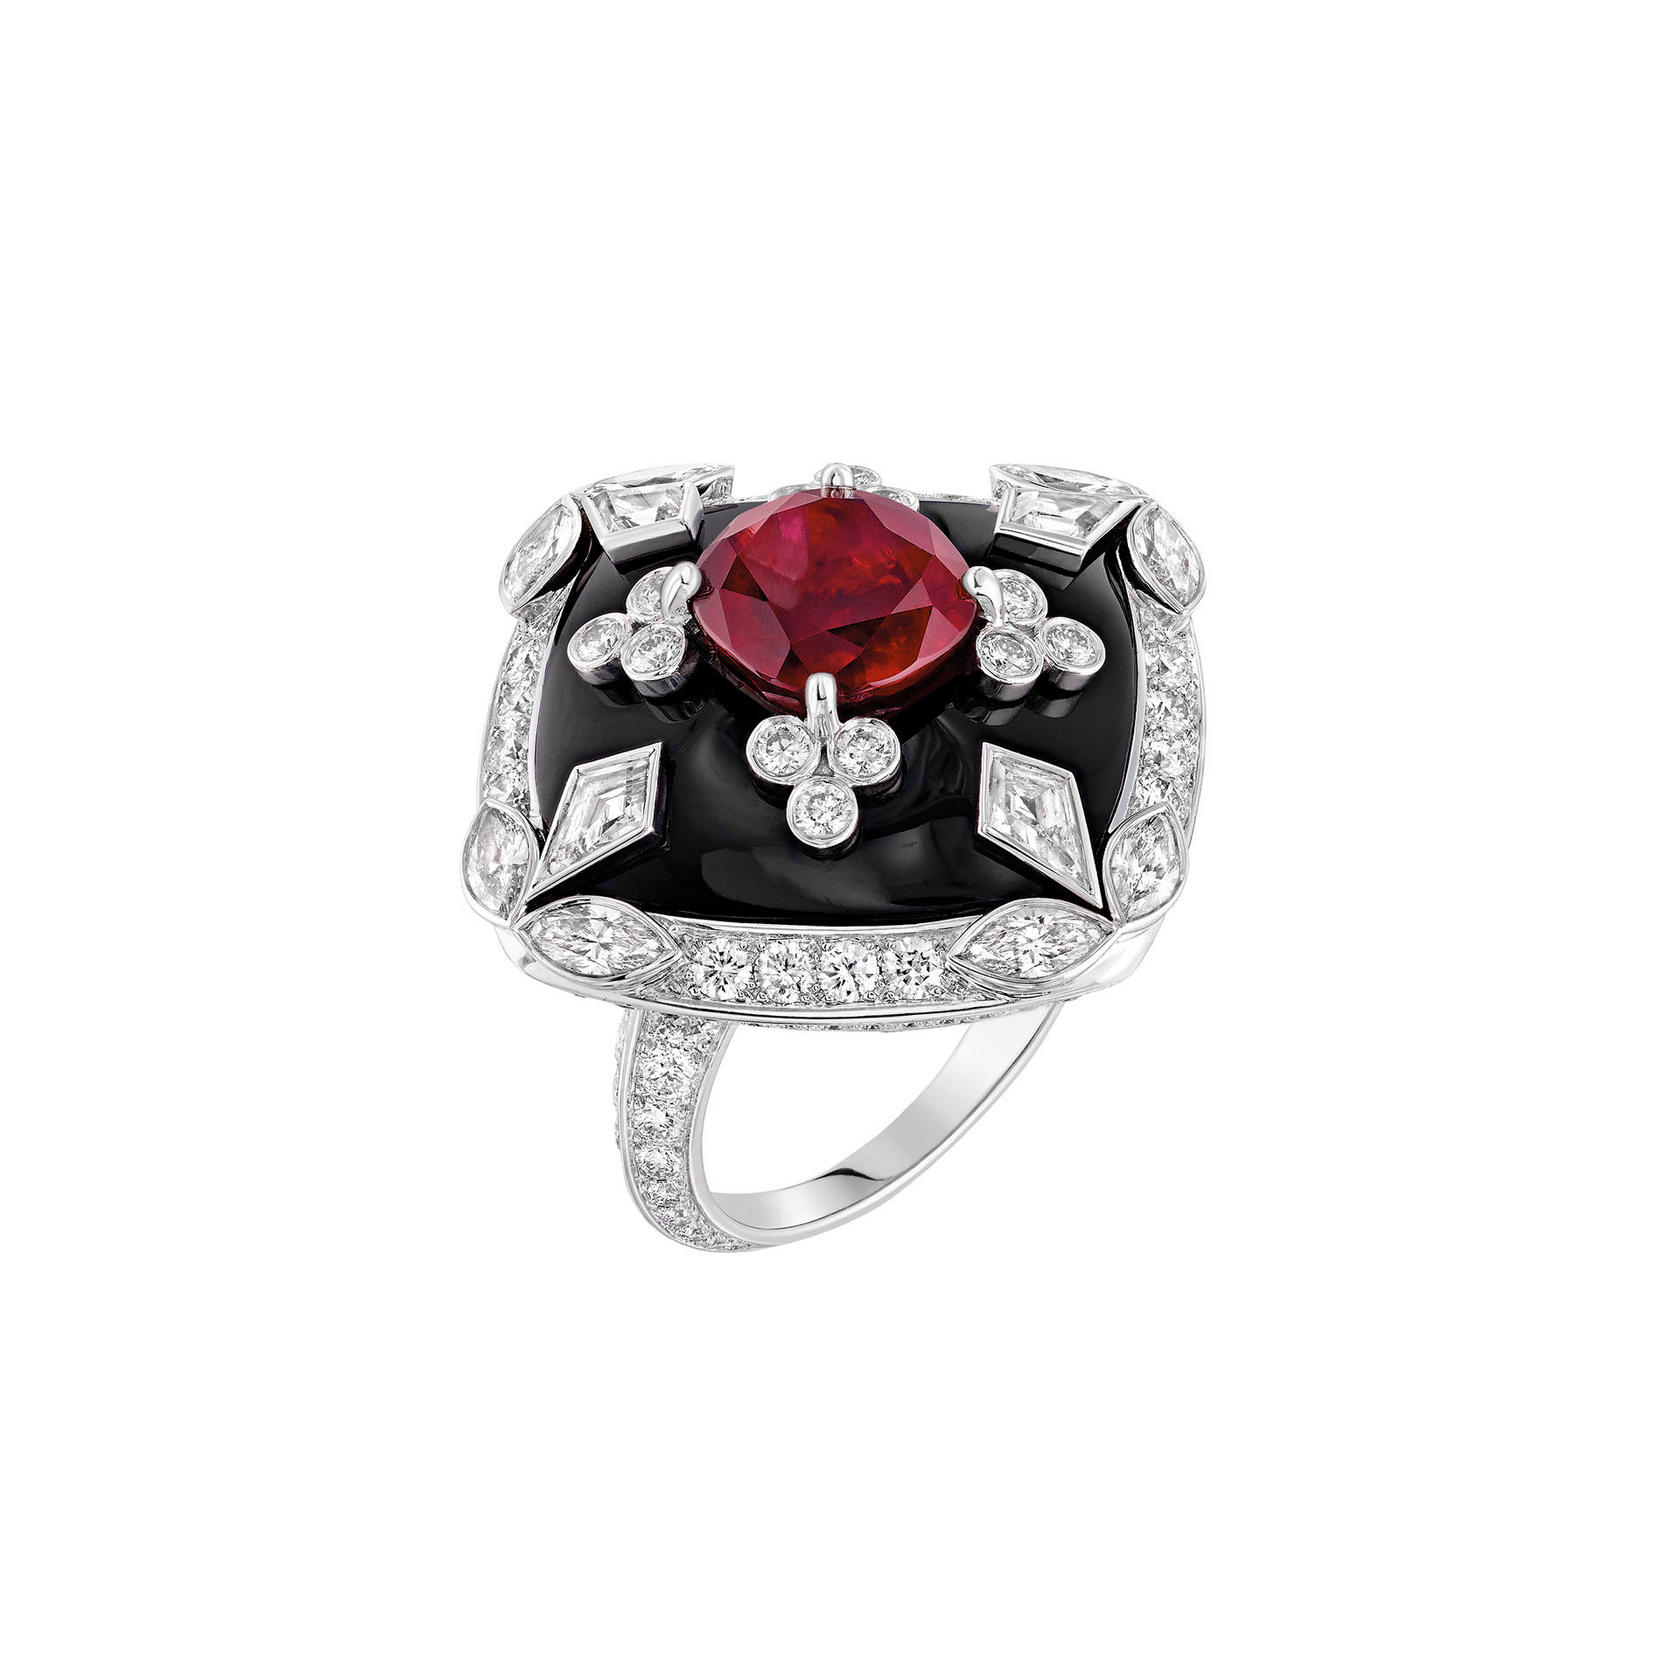 BoucheronThe white gold onyx ring is set with a 4.36ct Burma 'pigeon's blood' ruby and paved diamonds, HK$14.21 million